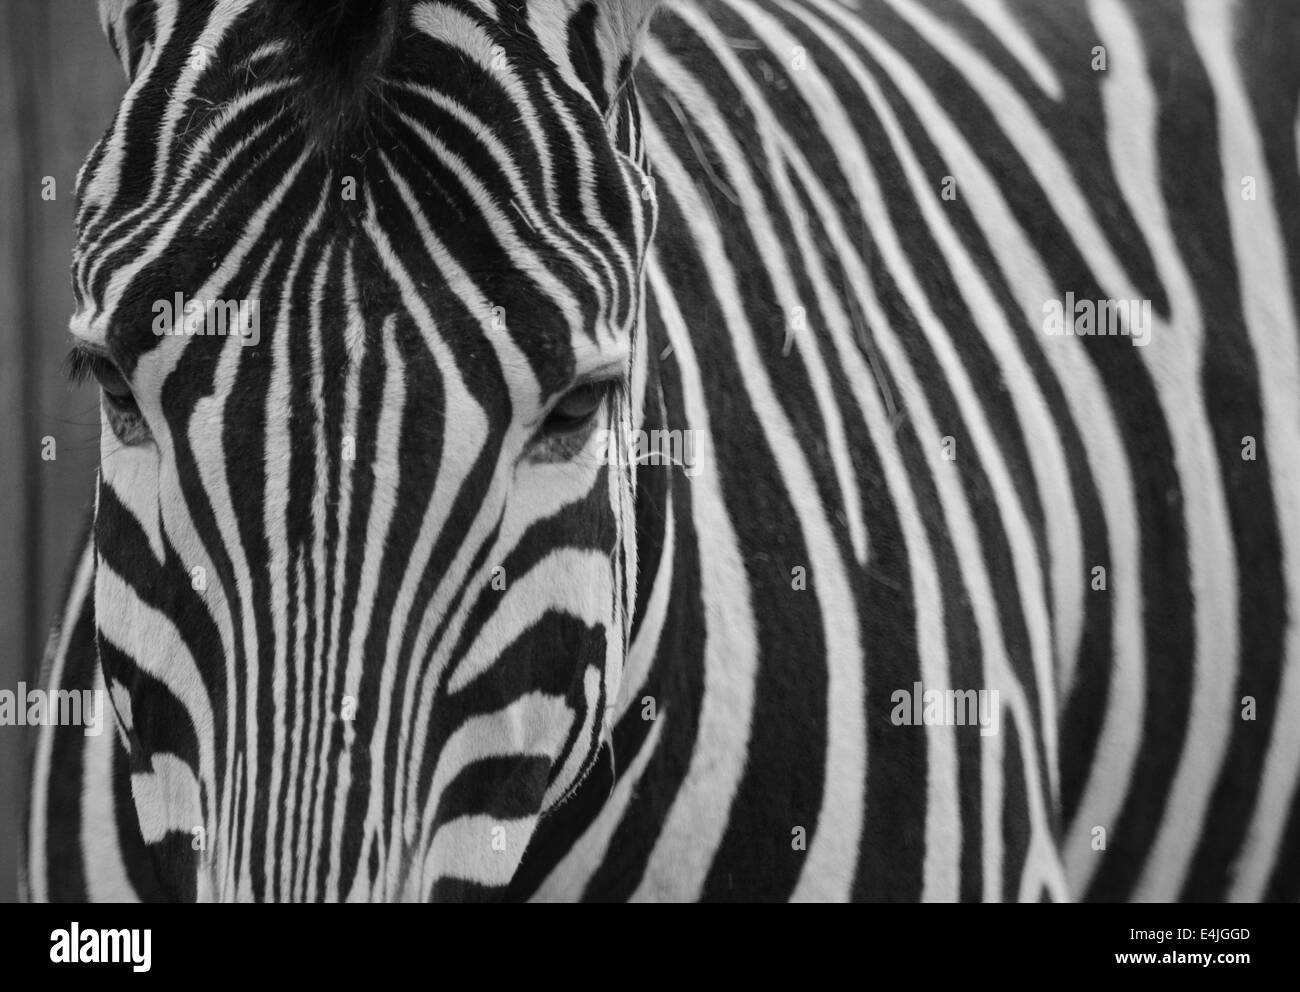 Picture of a zebra with the striped almost hiding the head. Interesting texture and curves. Stock Photo